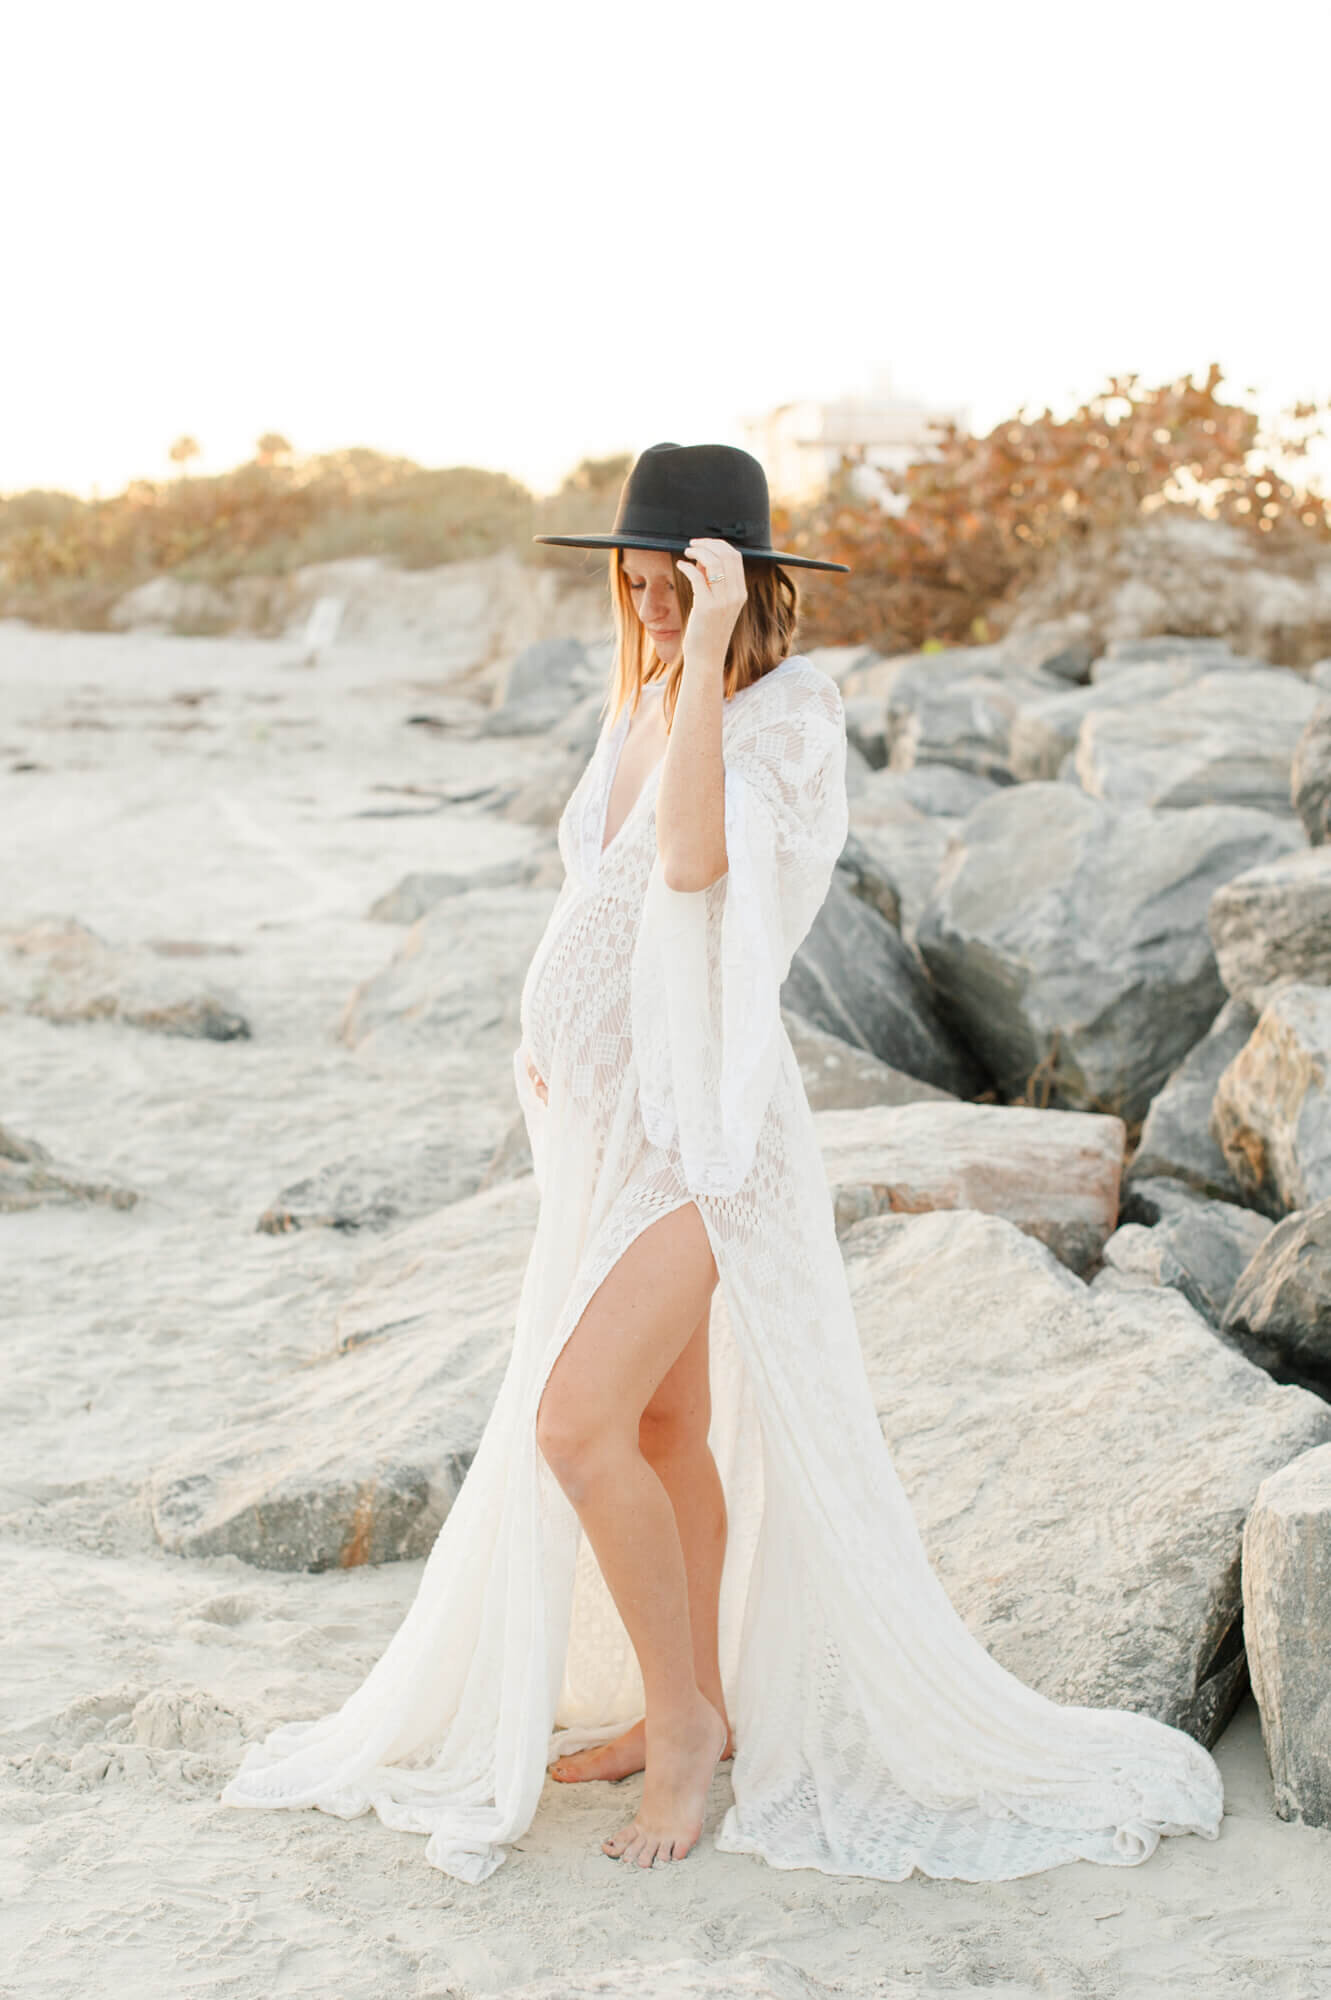 PRegnant mother stands near rocks holding her belly wearing a beautiful white lace gown